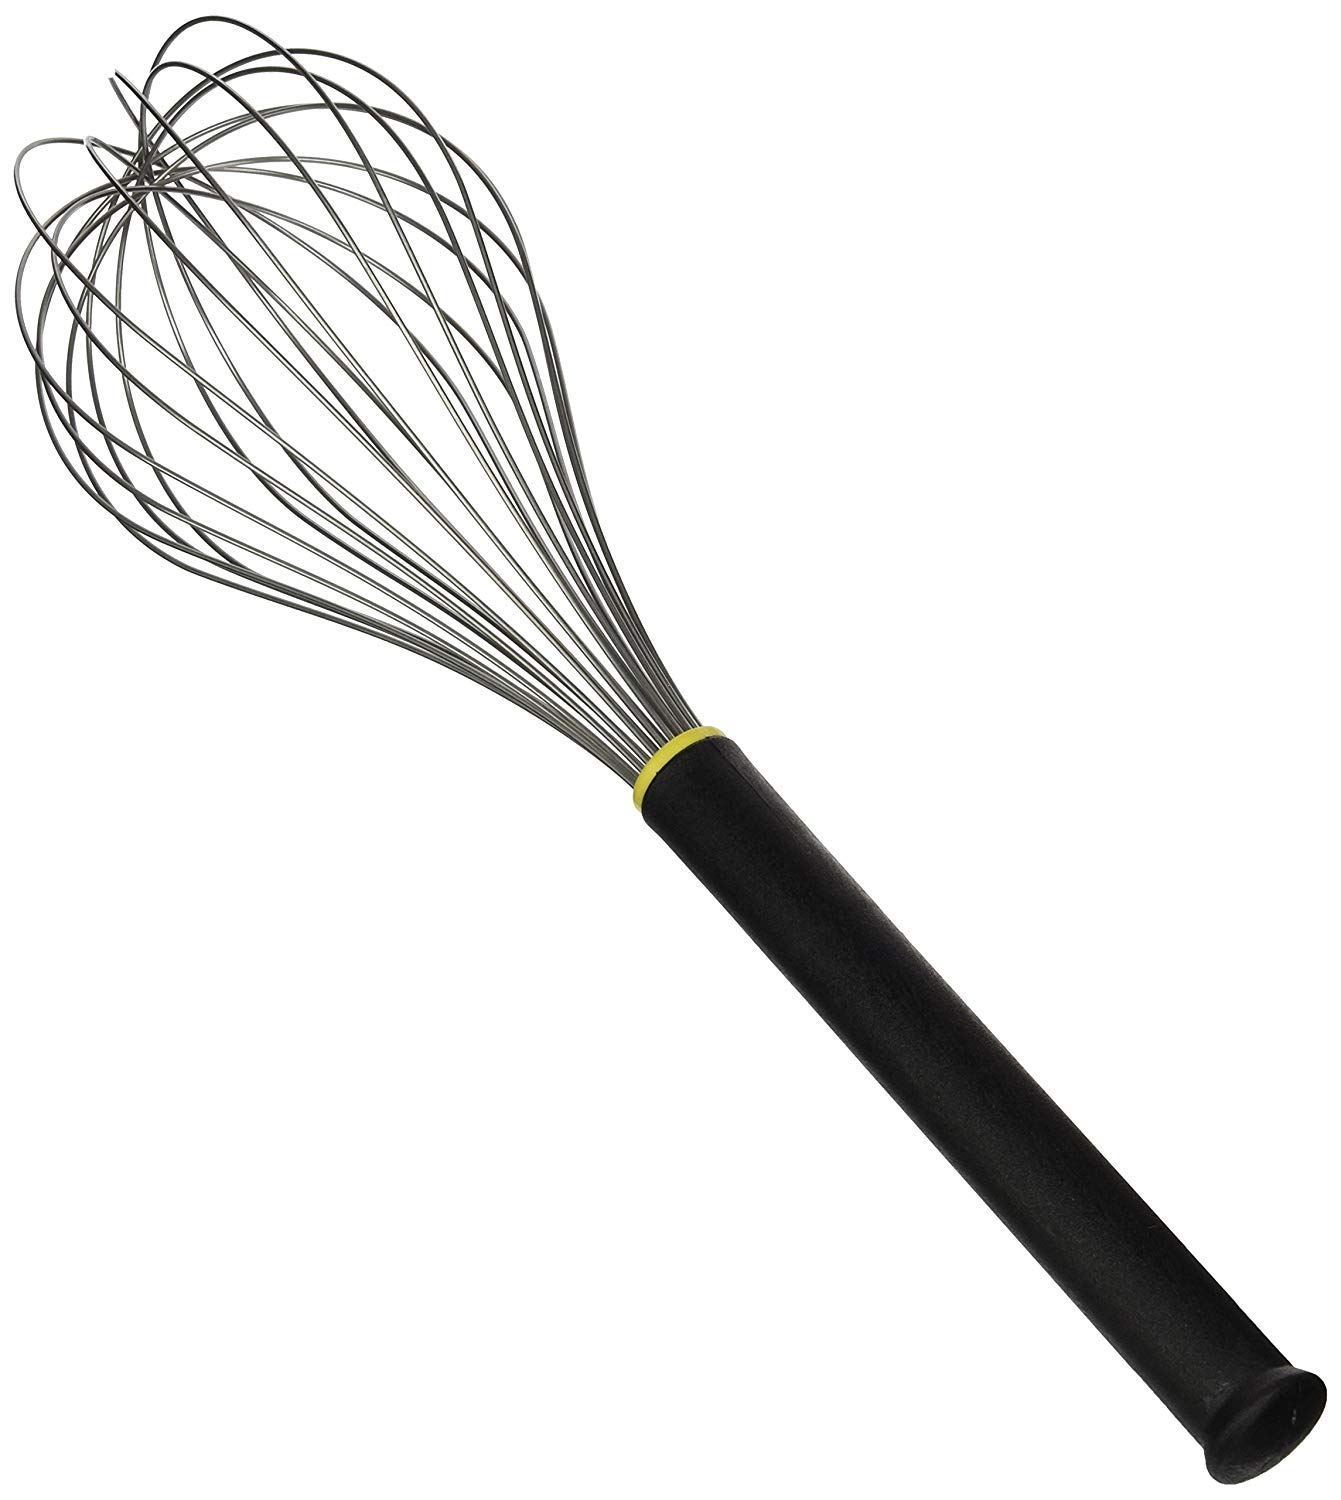 Whisk Drawing